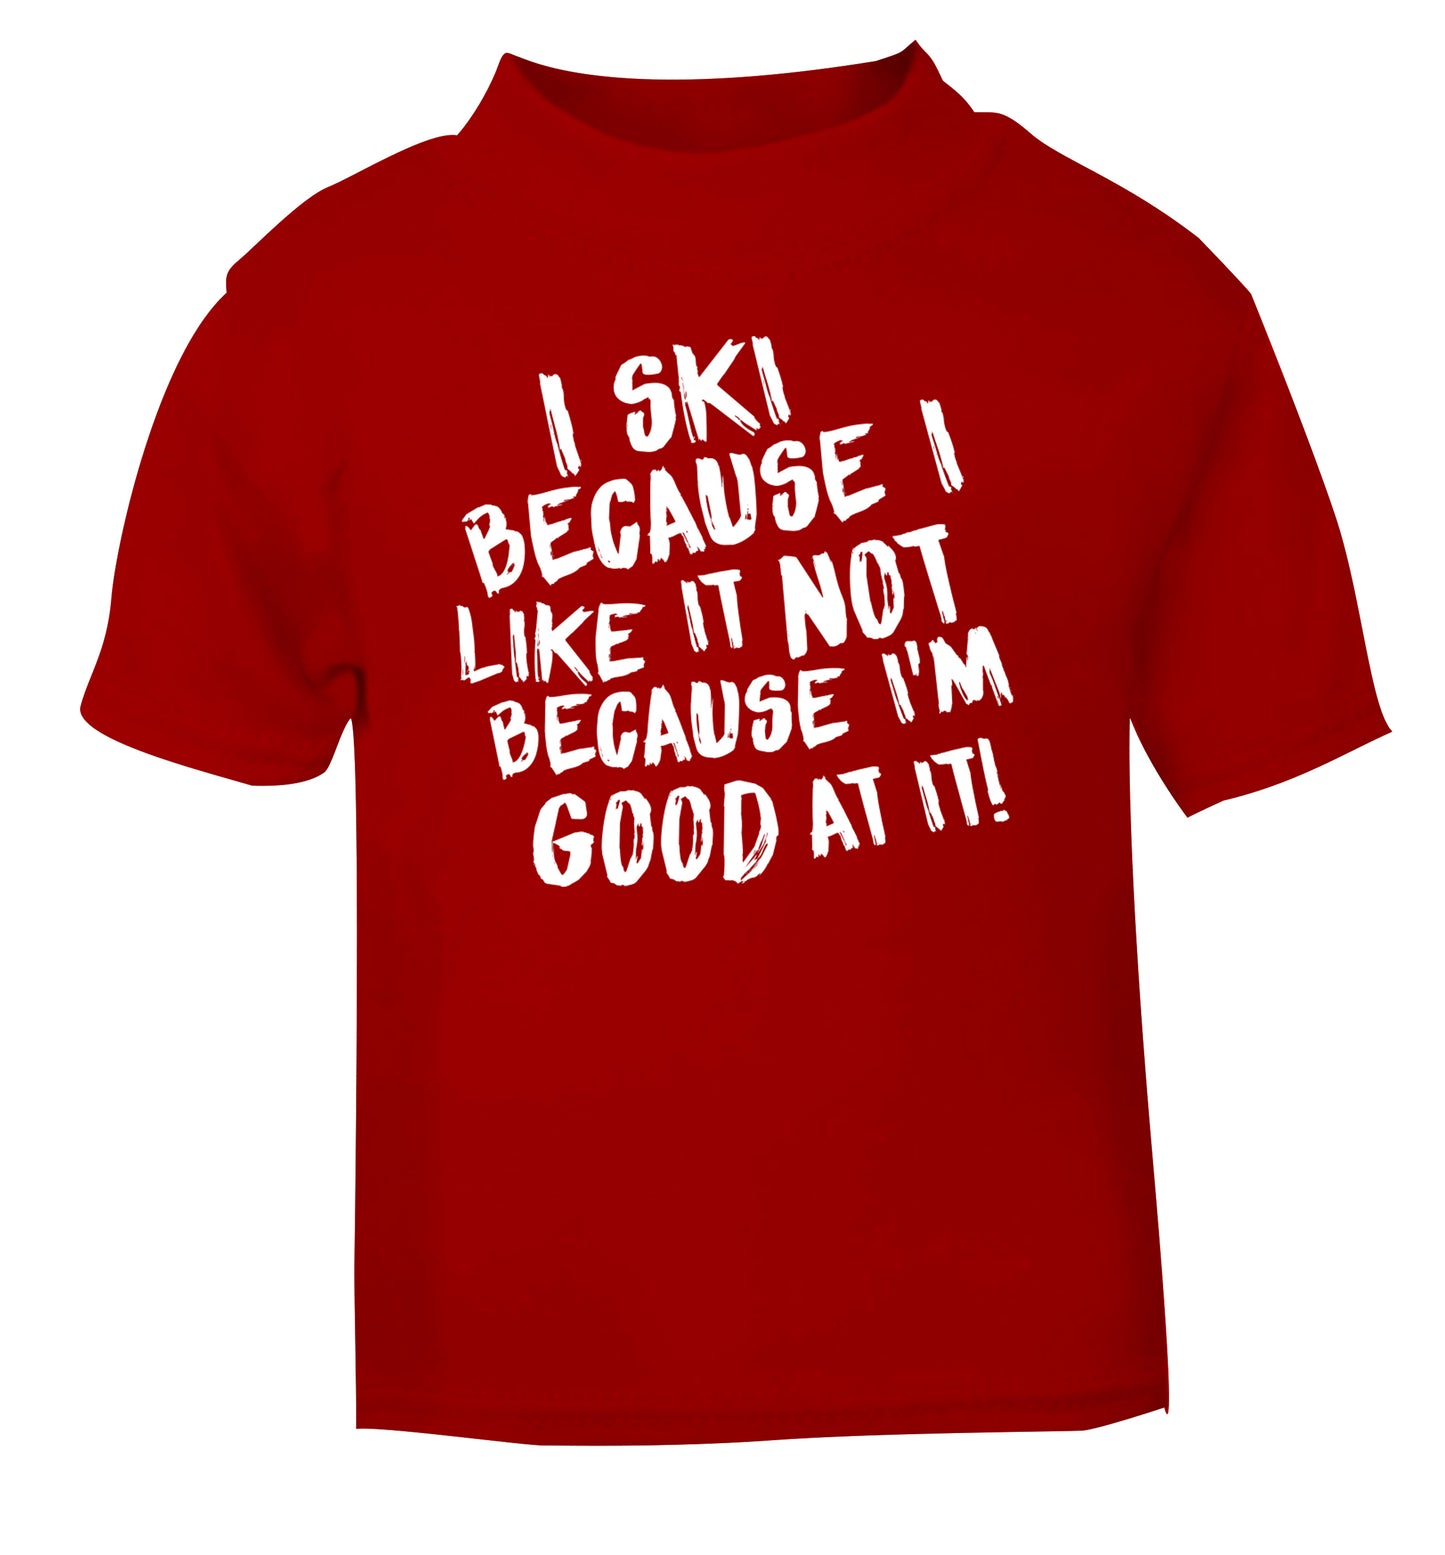 I ski because I like it not because I'm good at it red Baby Toddler Tshirt 2 Years